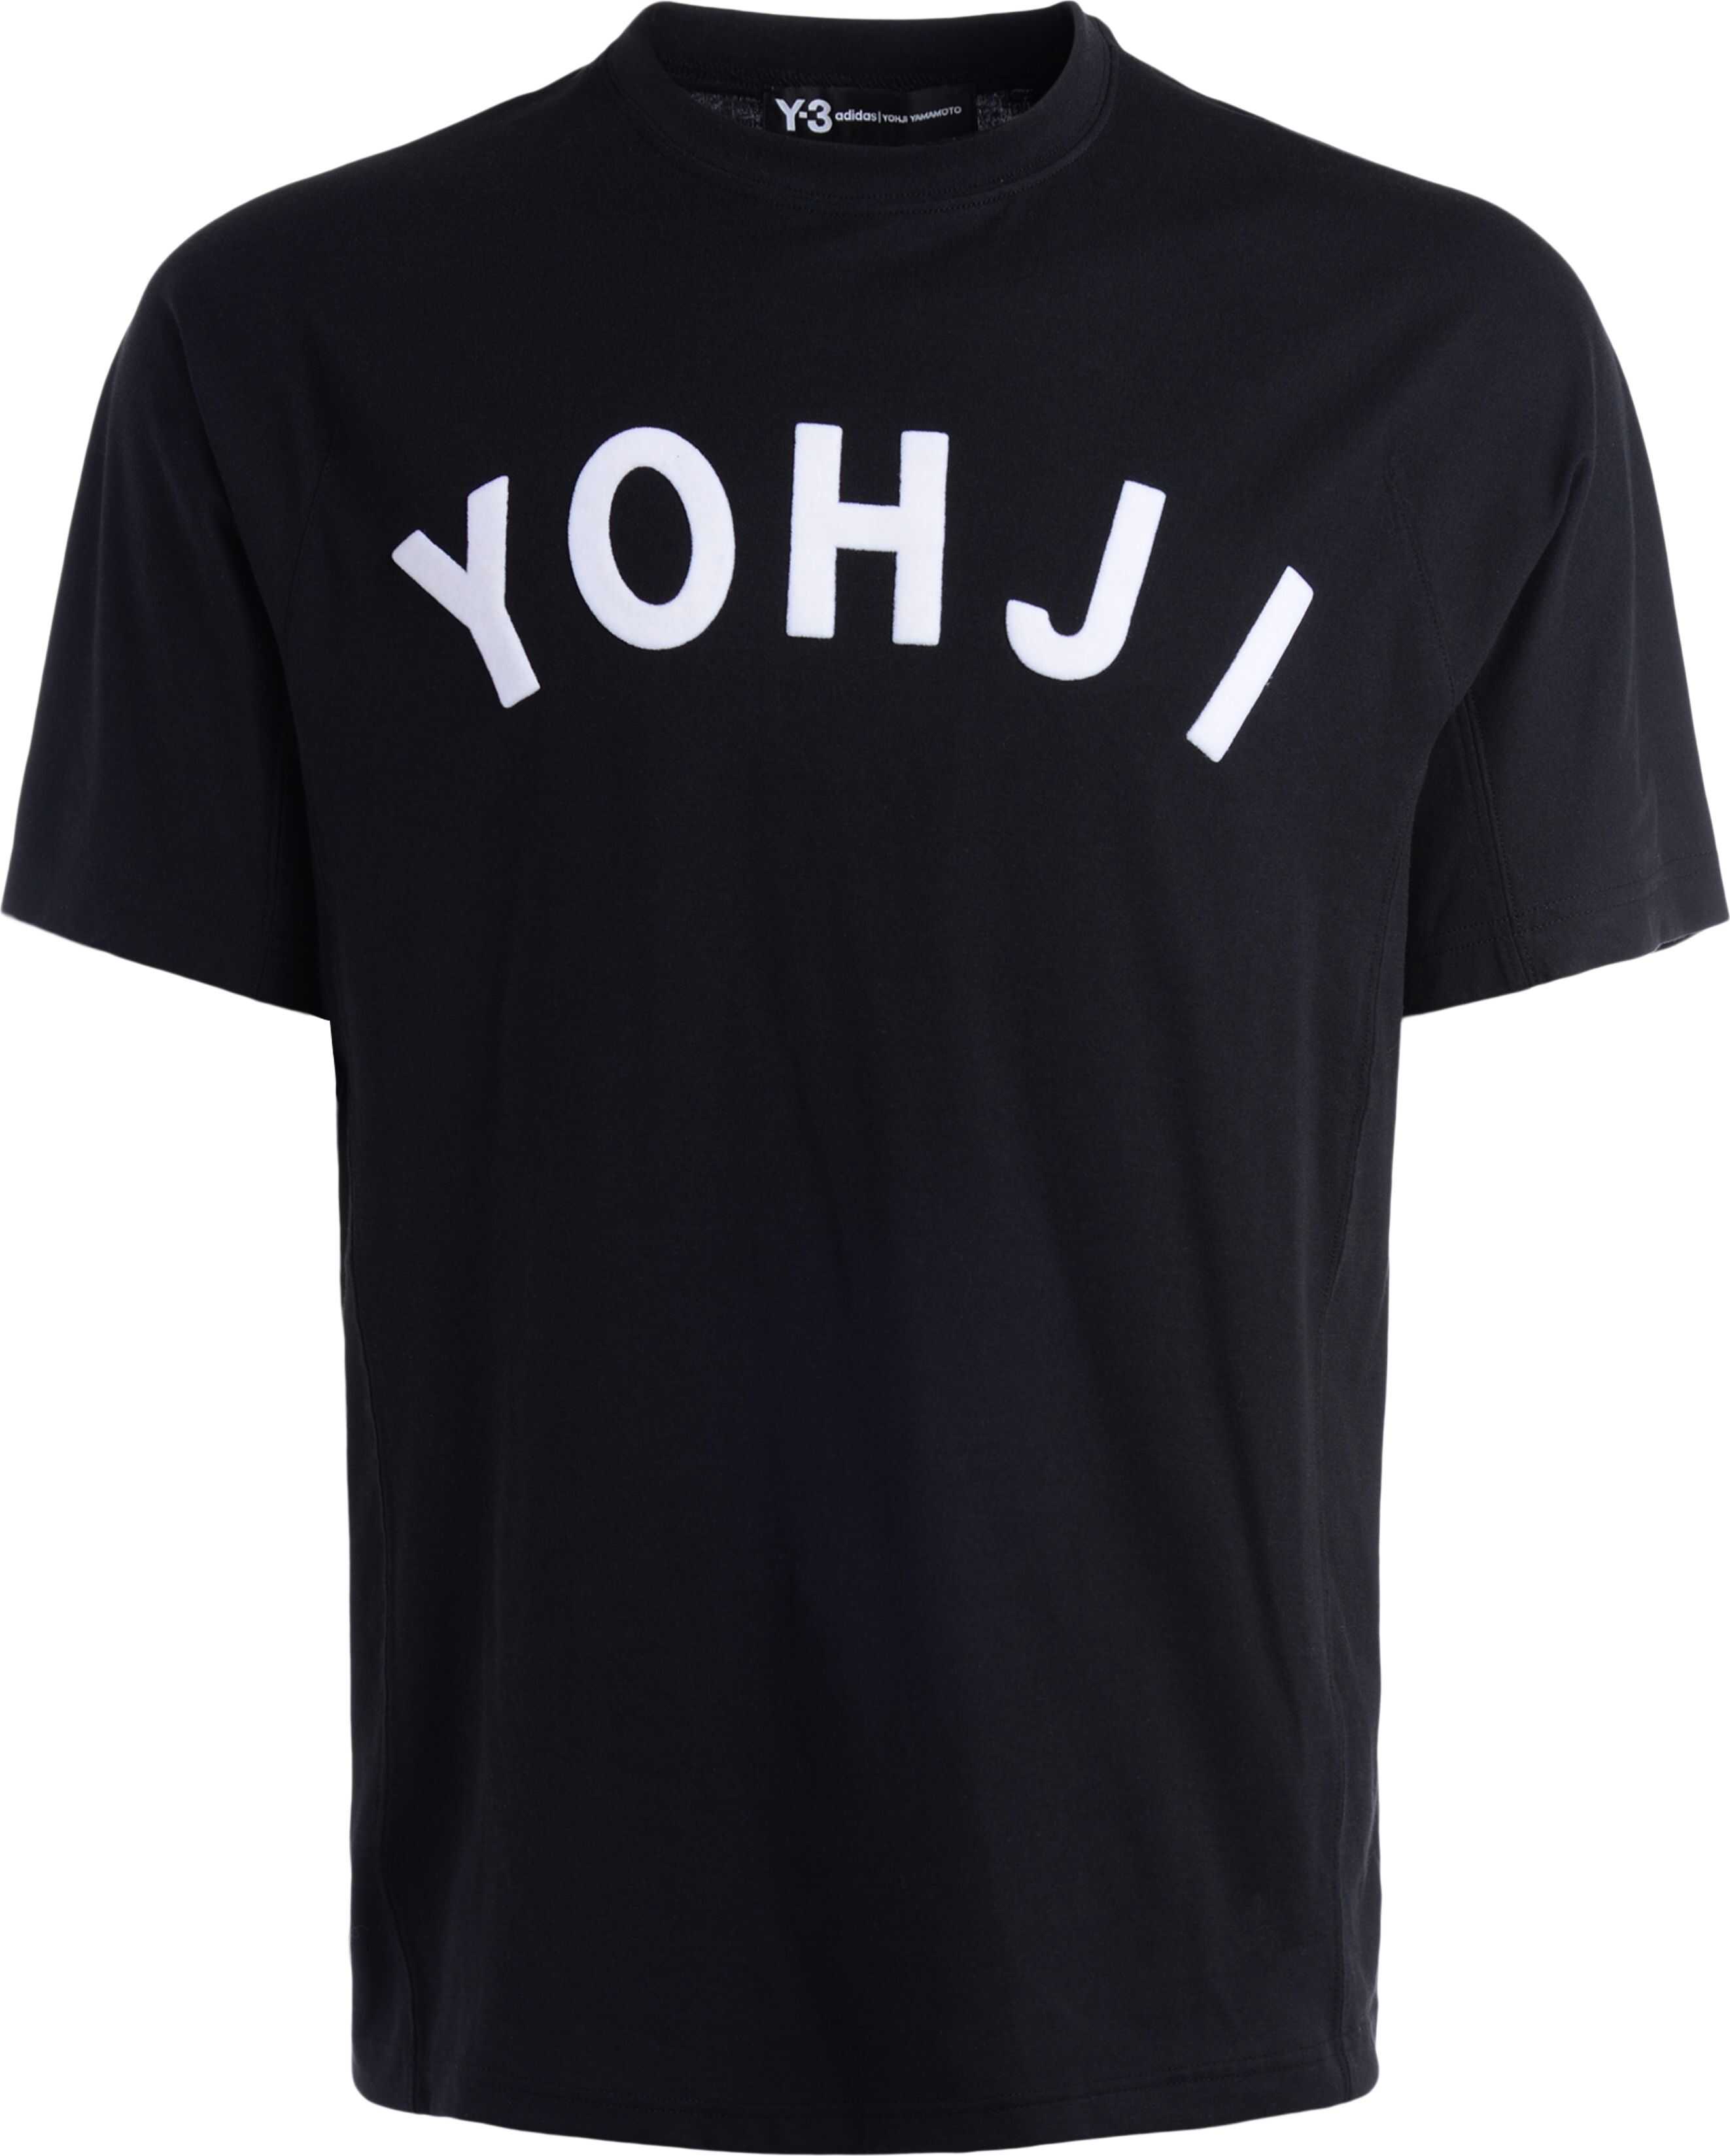 Y-3 T-Shirt Made Of Black Cotton With Applied Yohji Logo In White Black